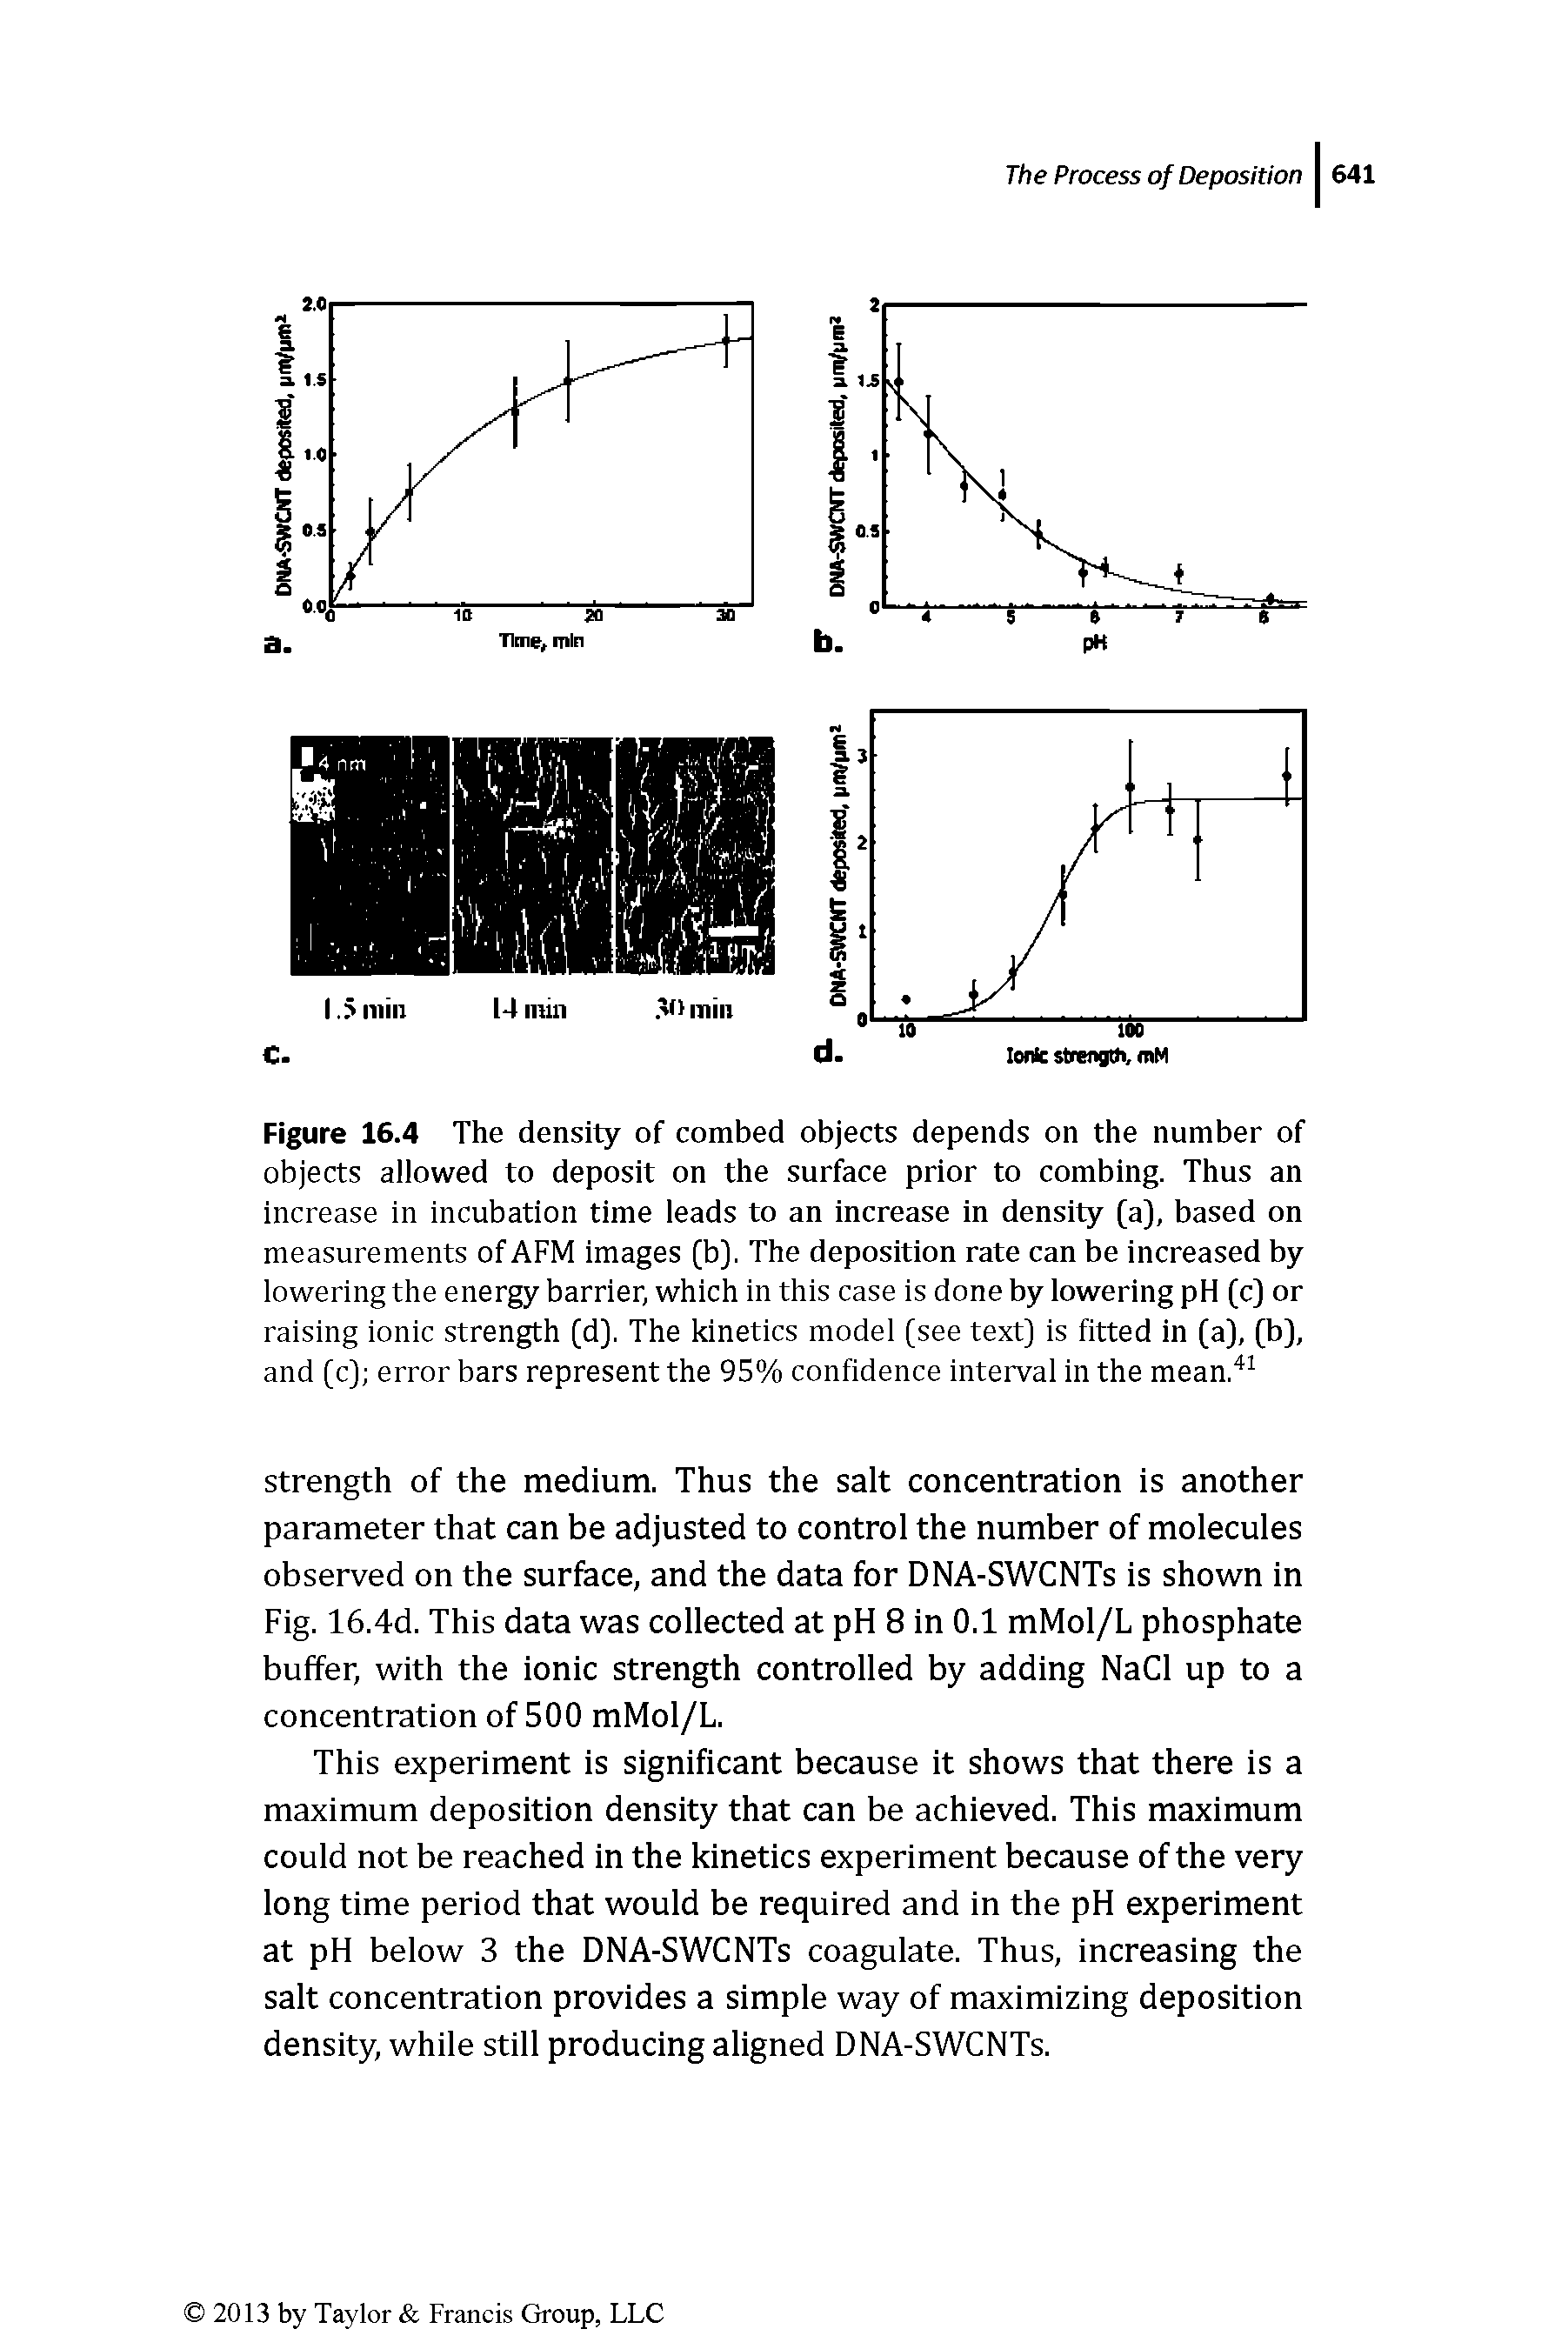 Figure 16.4 The density of combed objects depends on the number of objects allowed to deposit on the surface prior to combing. Thus an increase in incubation time leads to an increase in density (a), based on measurements of AFM images (bj. The deposition rate can be increased by lowering the energy barrier, which in this case is done by lowering pH (c) or raising ionic strength (dj. The kinetics model (see text) is fitted in (a), (b), and (c) error bars represent the 95% confidence interval in the mean. ...